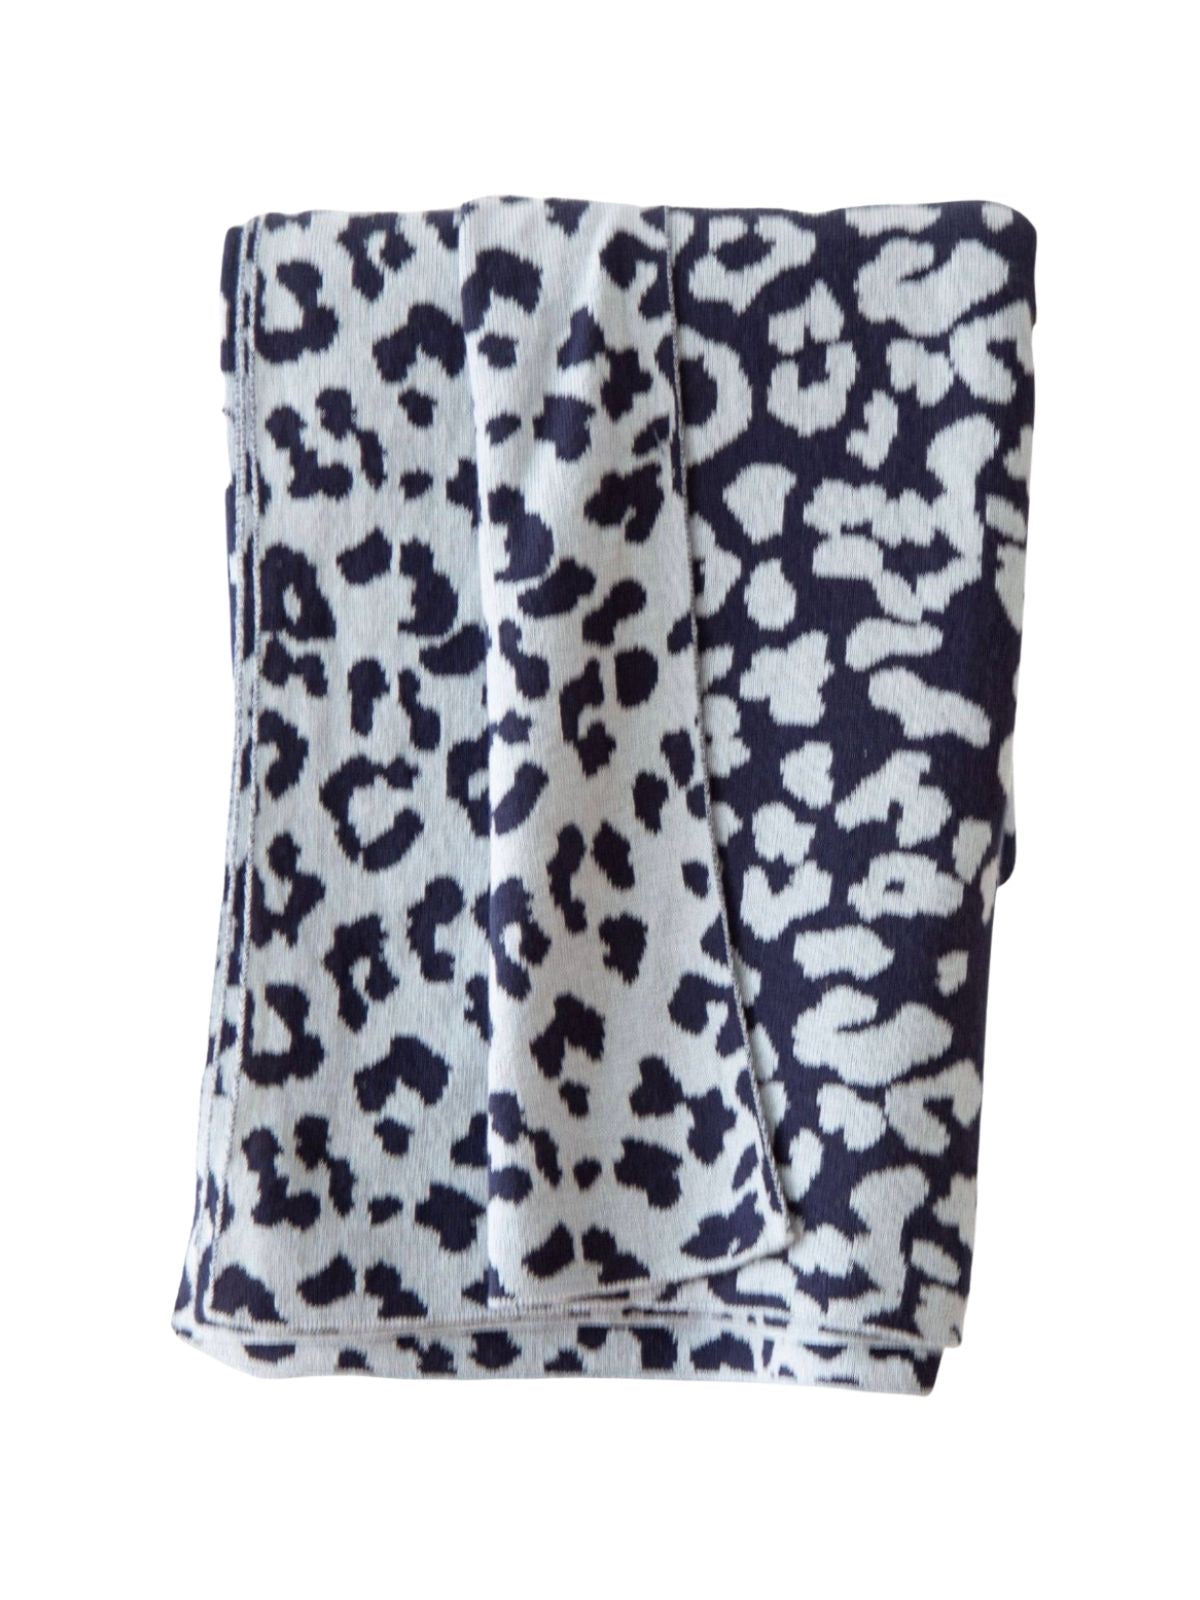 Leopard Print 100% Cotton Knit Decorative Throw Blanket in Navy Blue Color sold by KYA Home Decor, 50W x 60L.